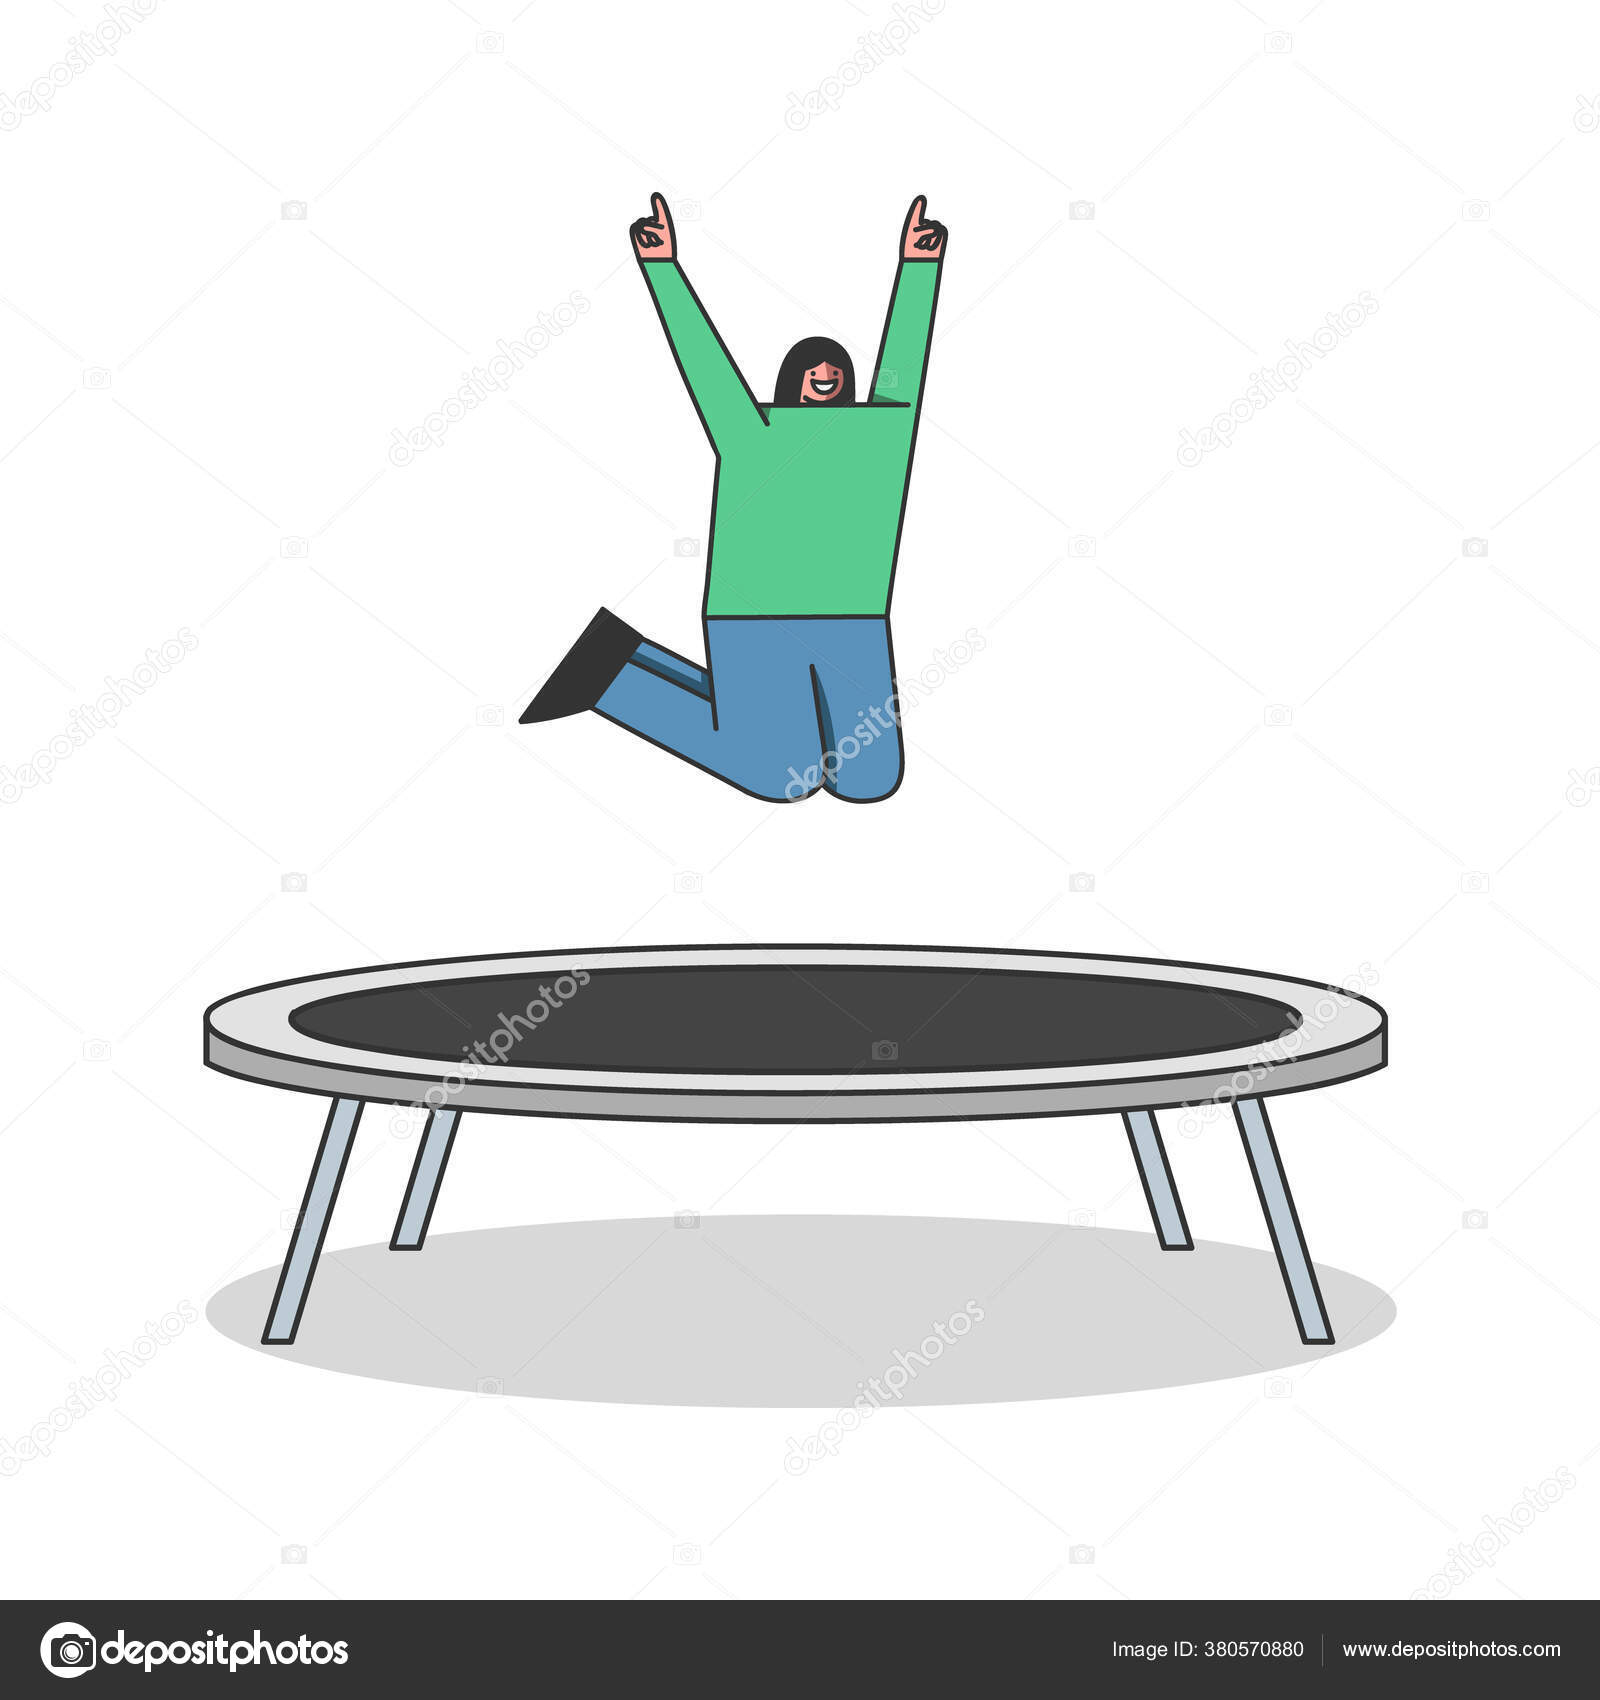 Jumping kids yong child character in jump Vector Image